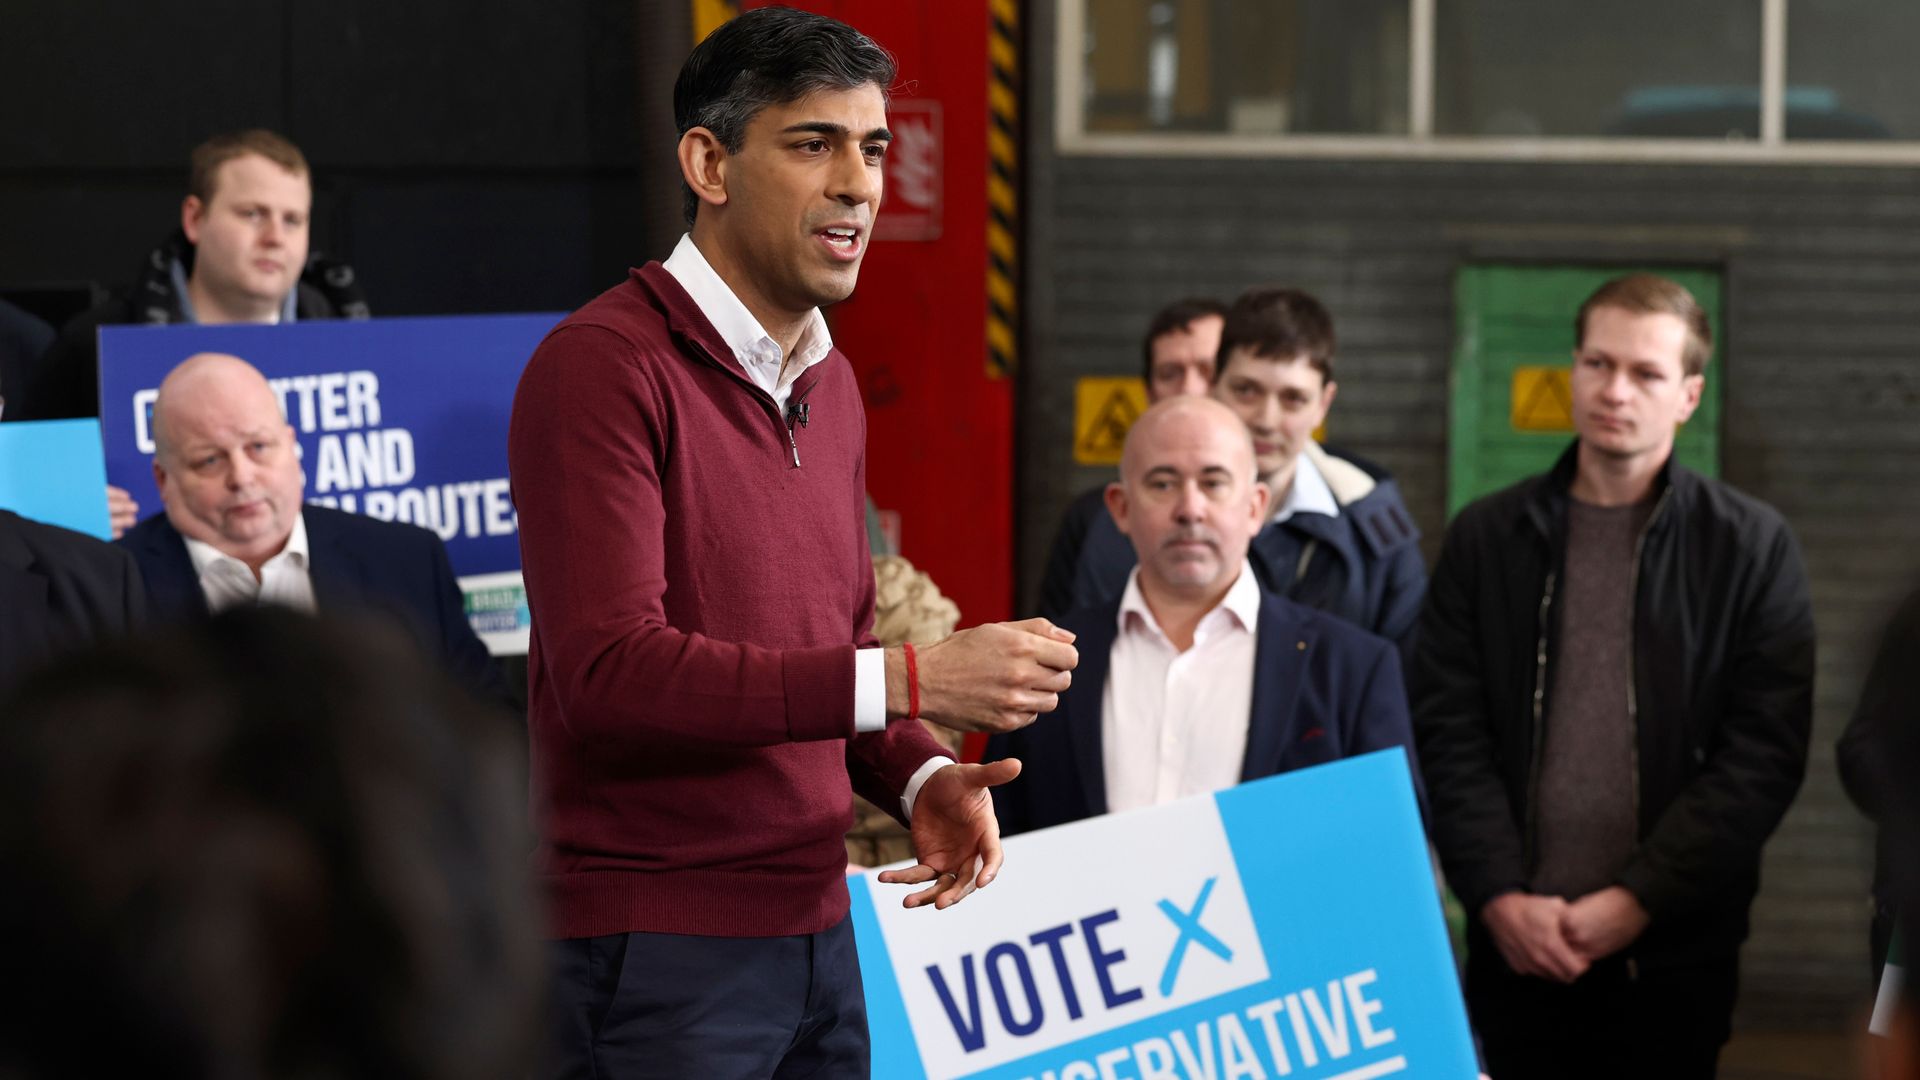 Minister insists Sunak has 'everything to fight for' despite Tory thrashing in local elections